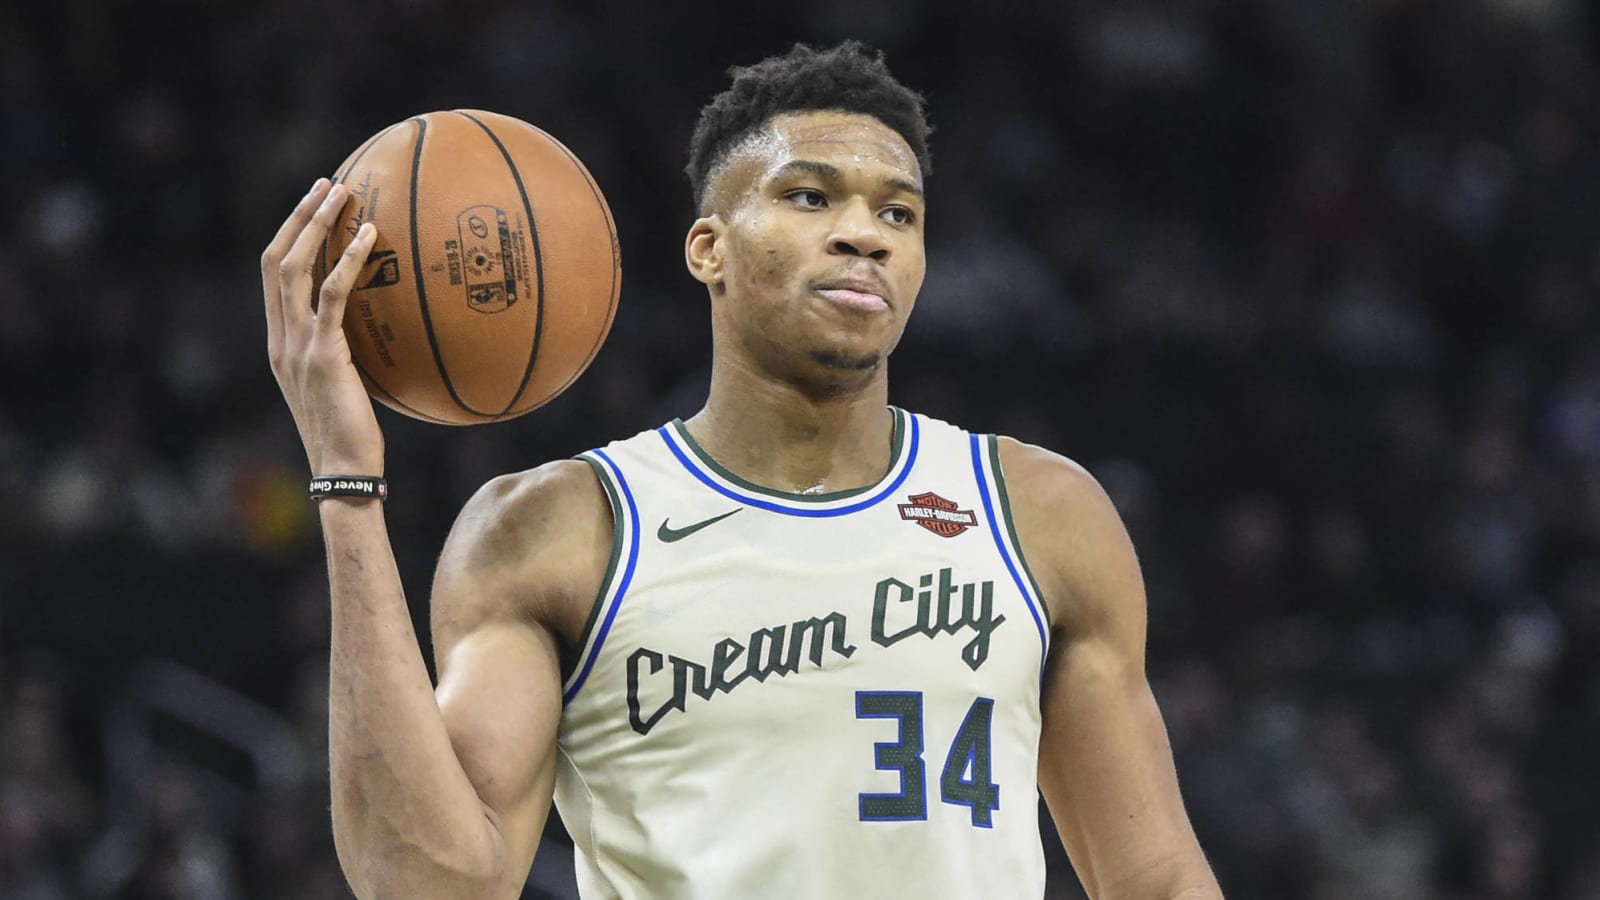 Giannis Antetokounmpo (quad) out for Wednesday's game vs. Pelicans